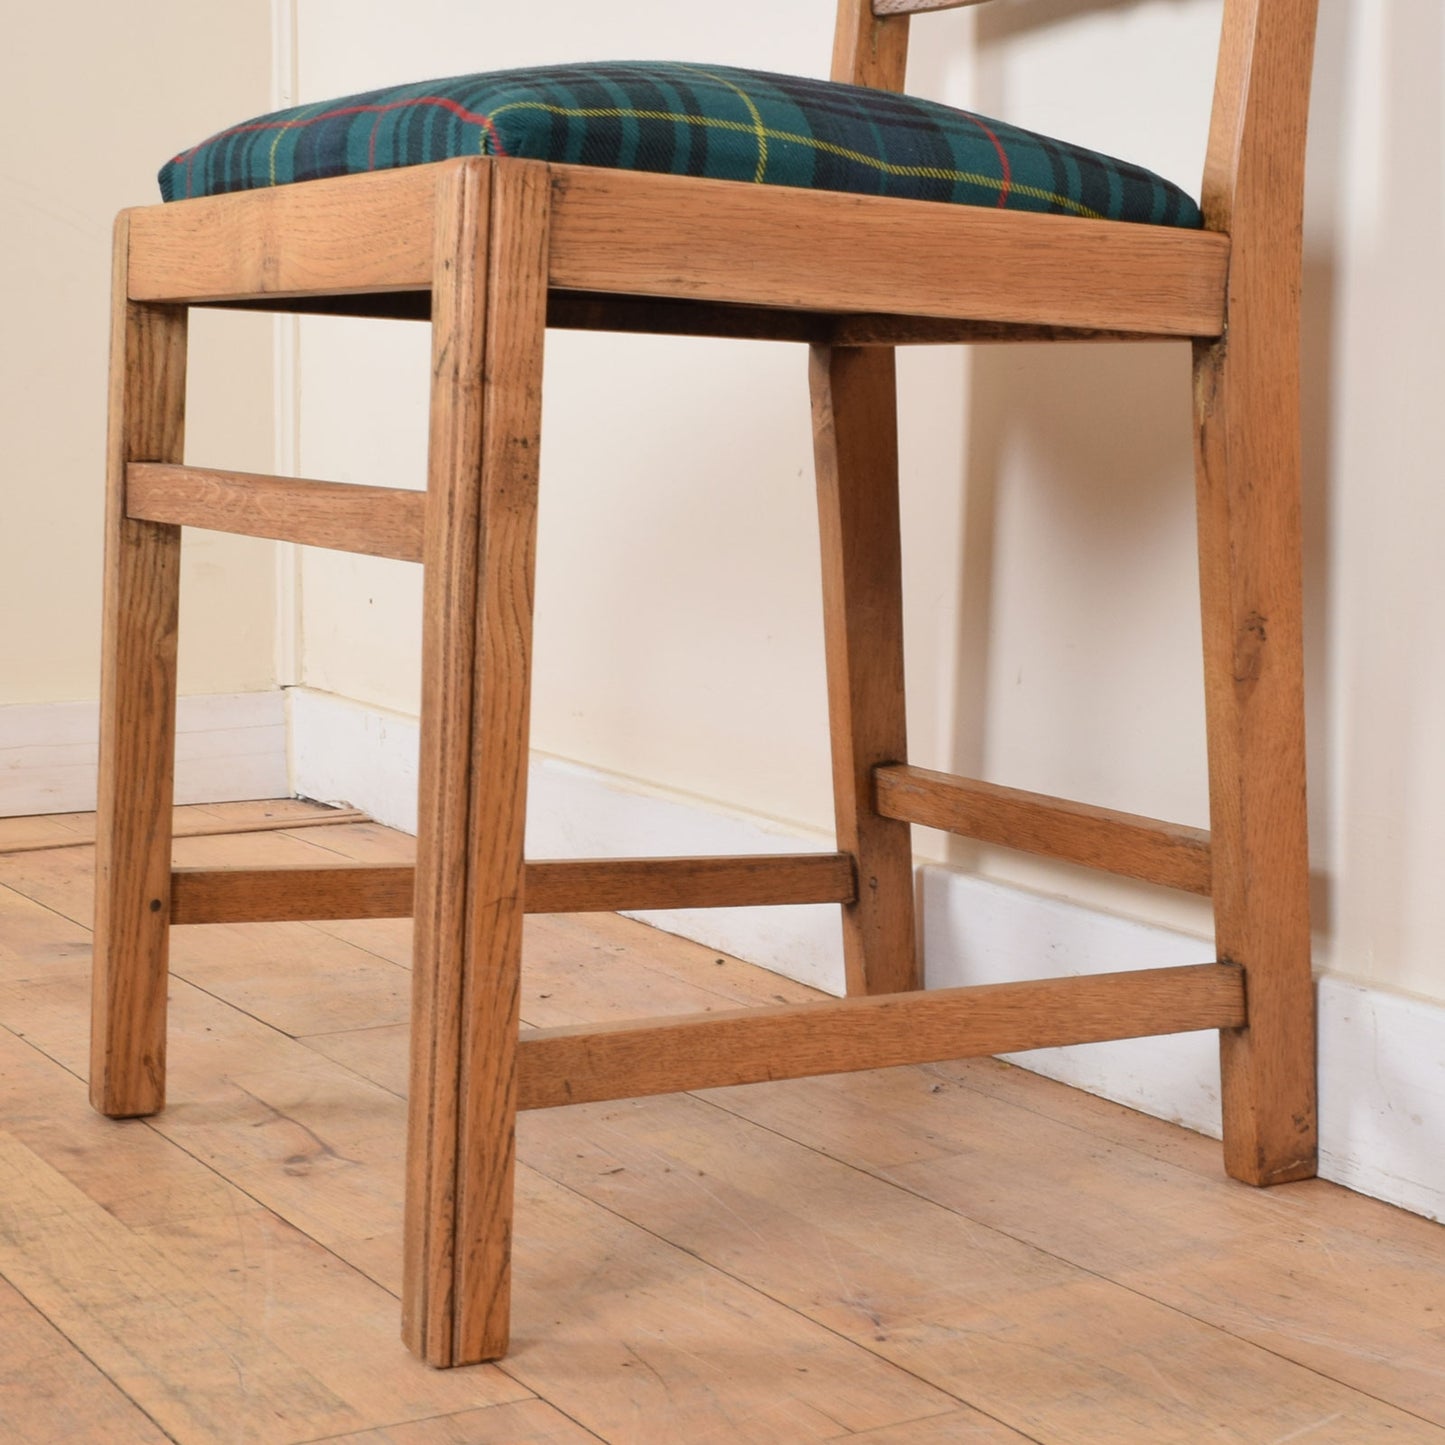 Extending Draw Leaf Table with Six Chairs